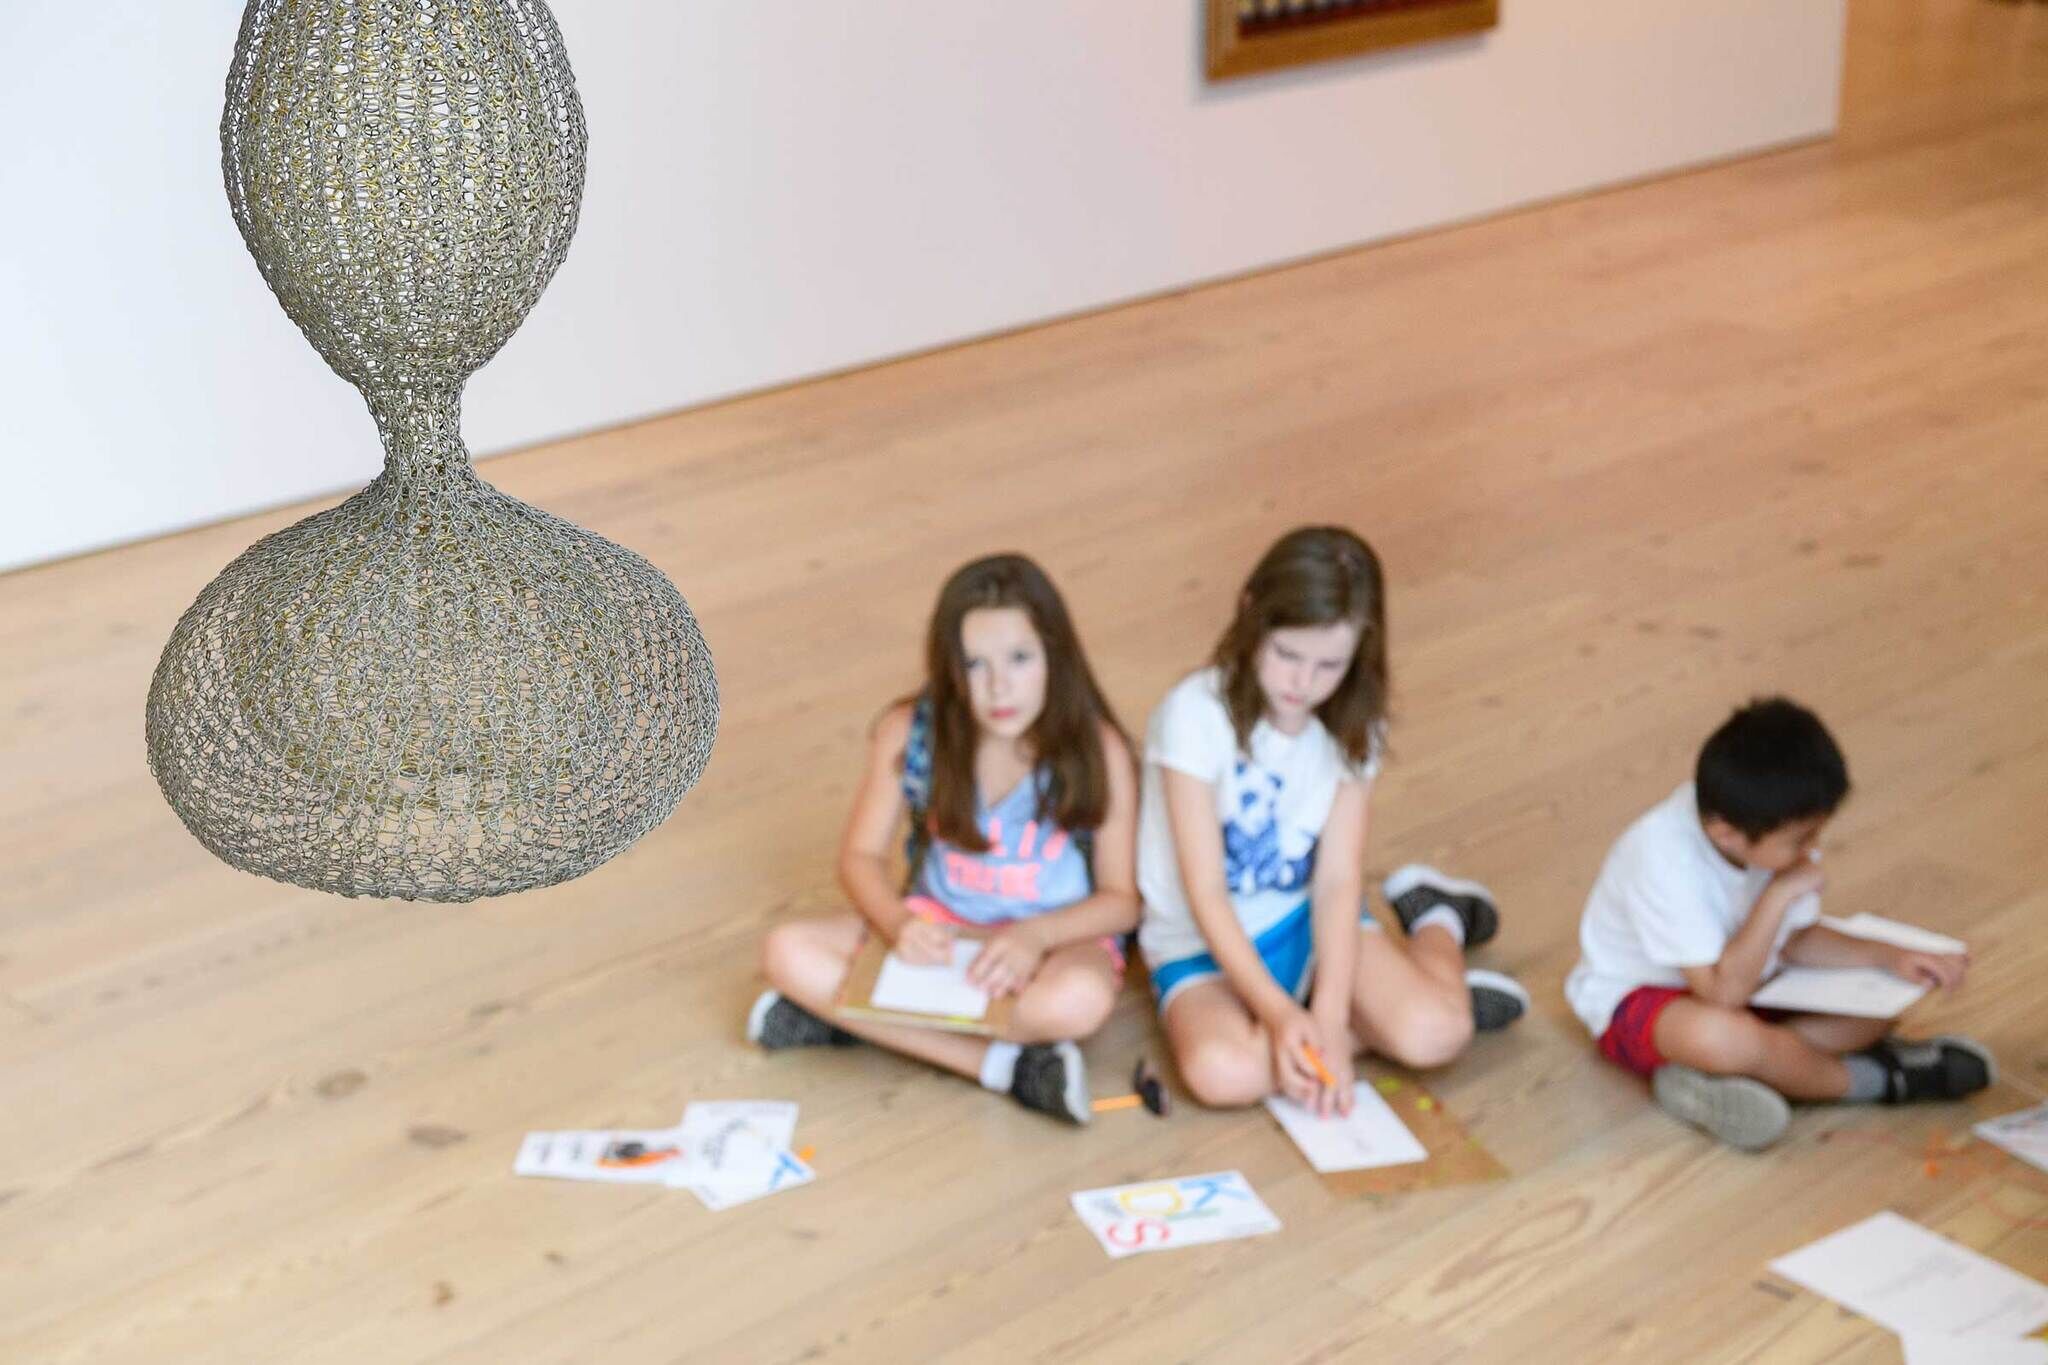 Two kids in the galleries, completing an artmaking activity before a Ruth Asawa sculpture.